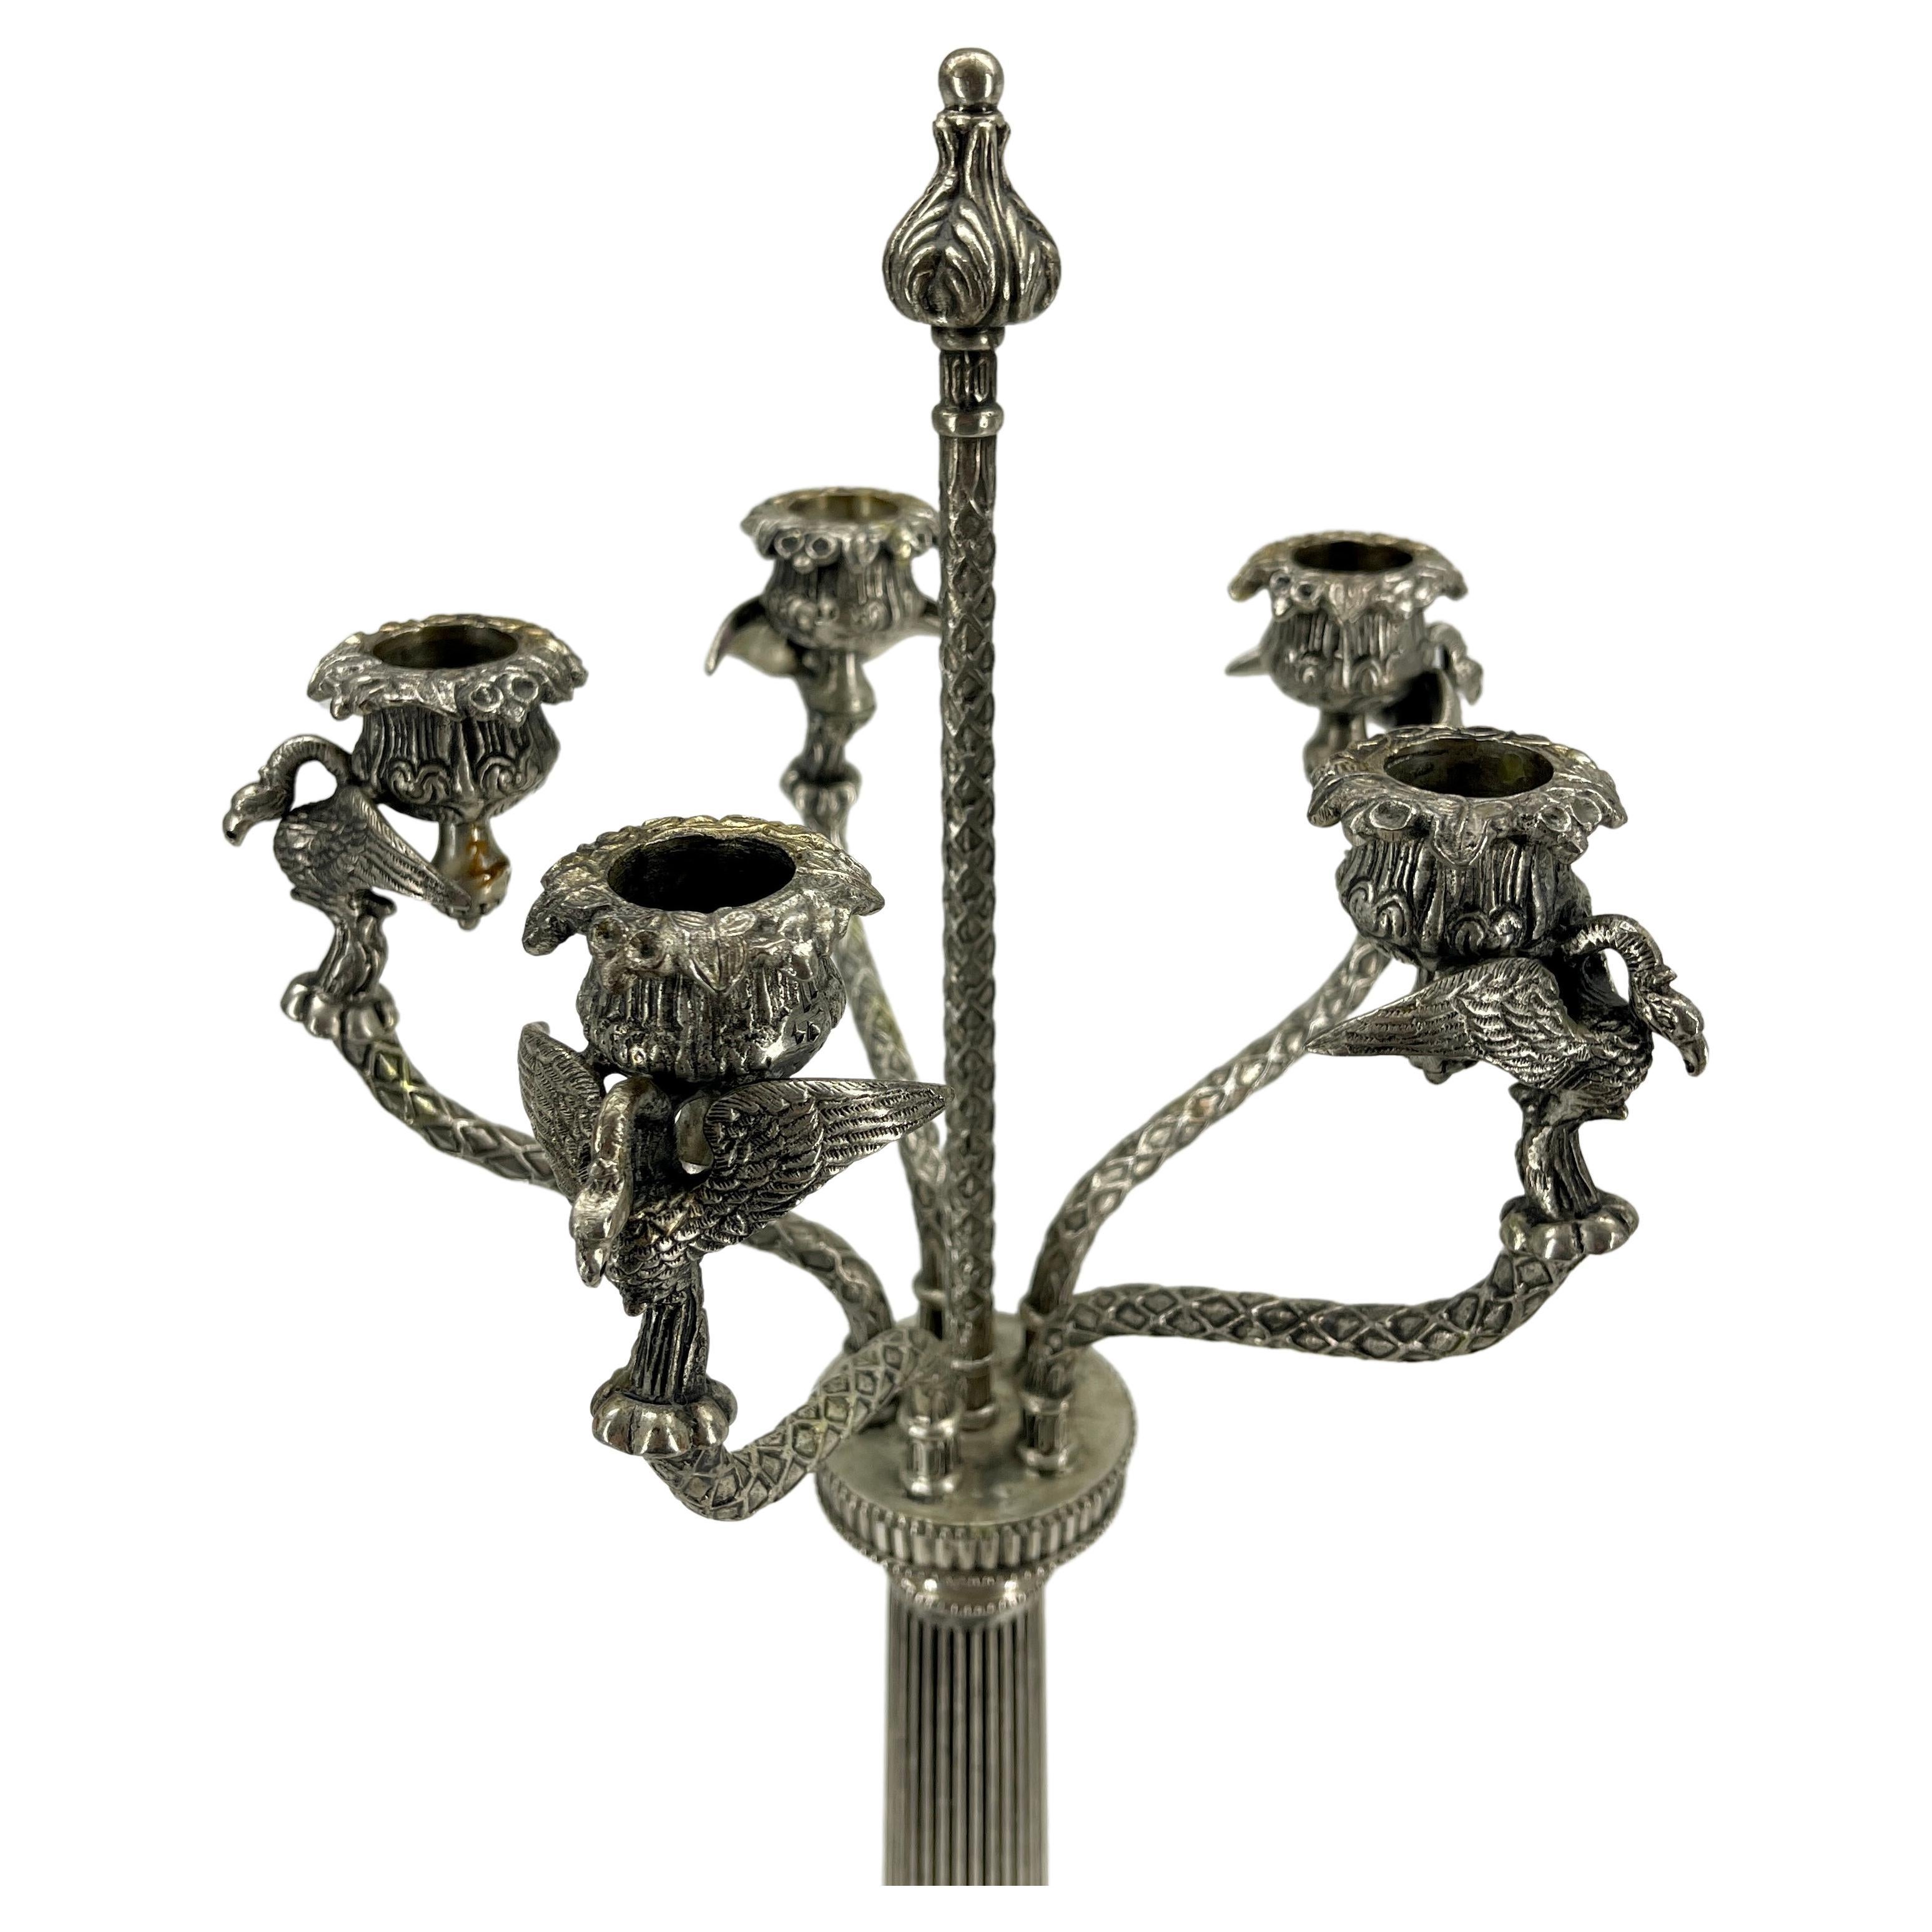 Single tall candelabra in silver plate with five candlestick arms each with Griffon Vultures.
The Gyps is a genus of Old World vultures that was proposed by Marie Jules César Savigny in 1809. Its members are sometimes known as griffon vultures.